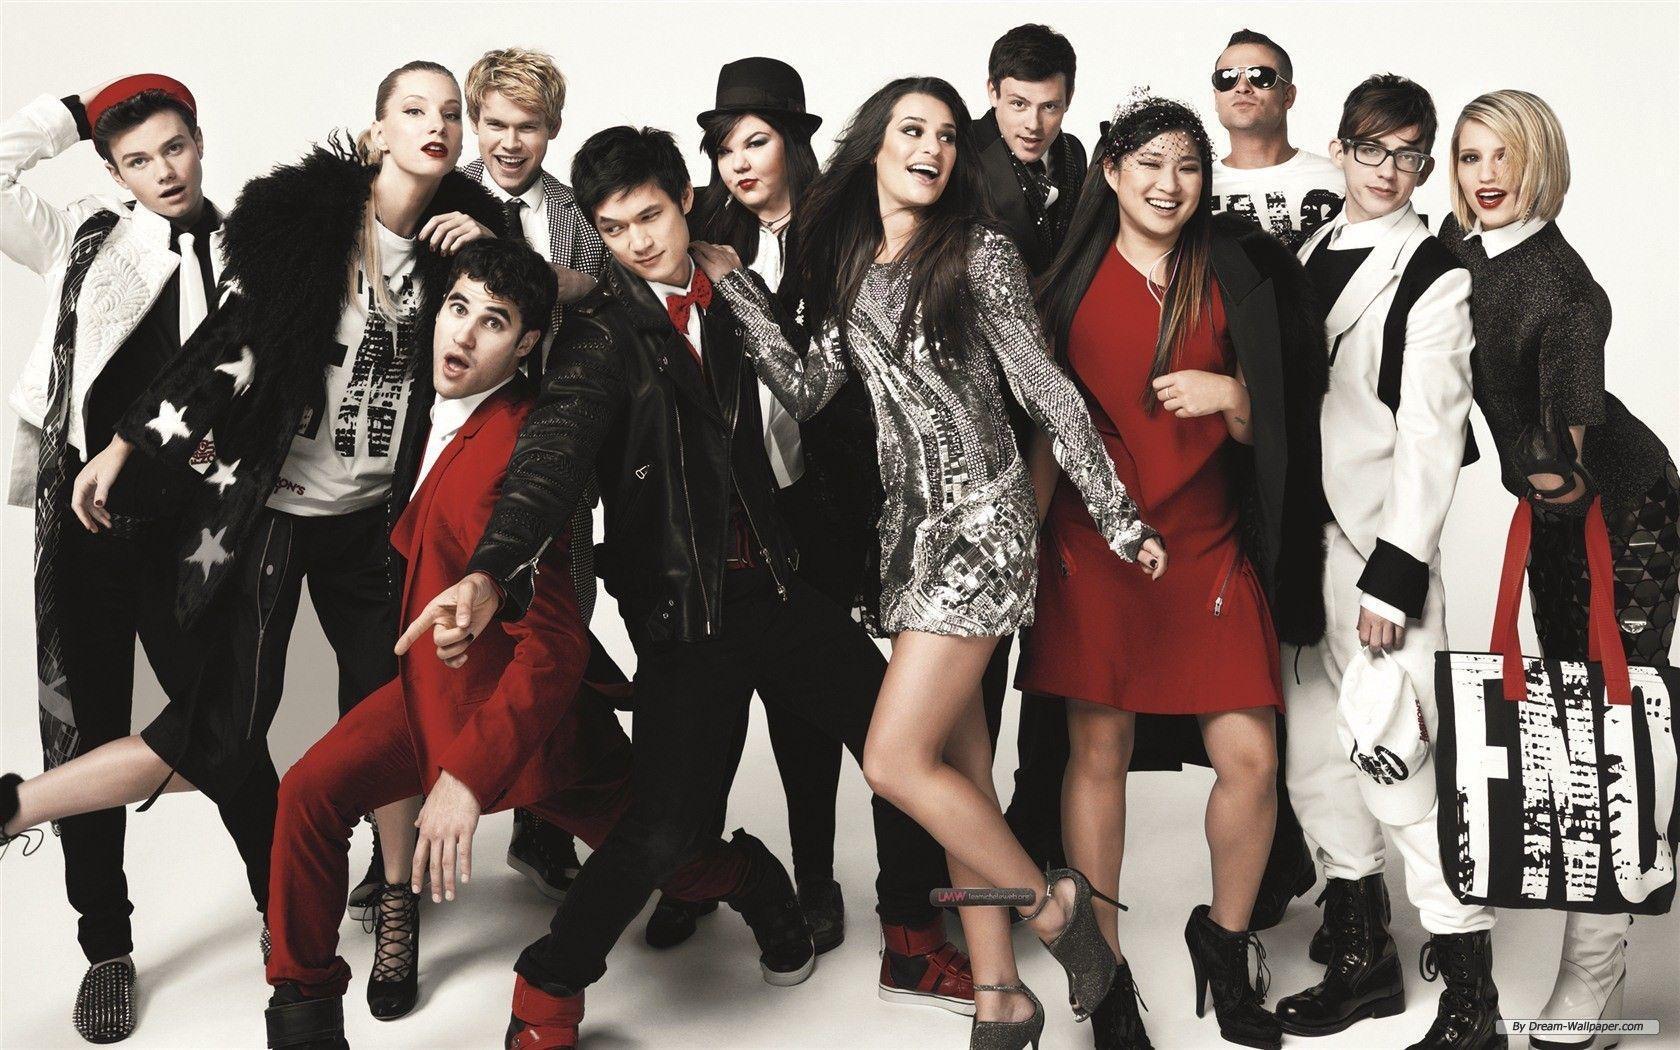 Glee Wallpaper. Glee Wallpaper, Glee Logo Wallpaper and Glee Cast Wallpaper